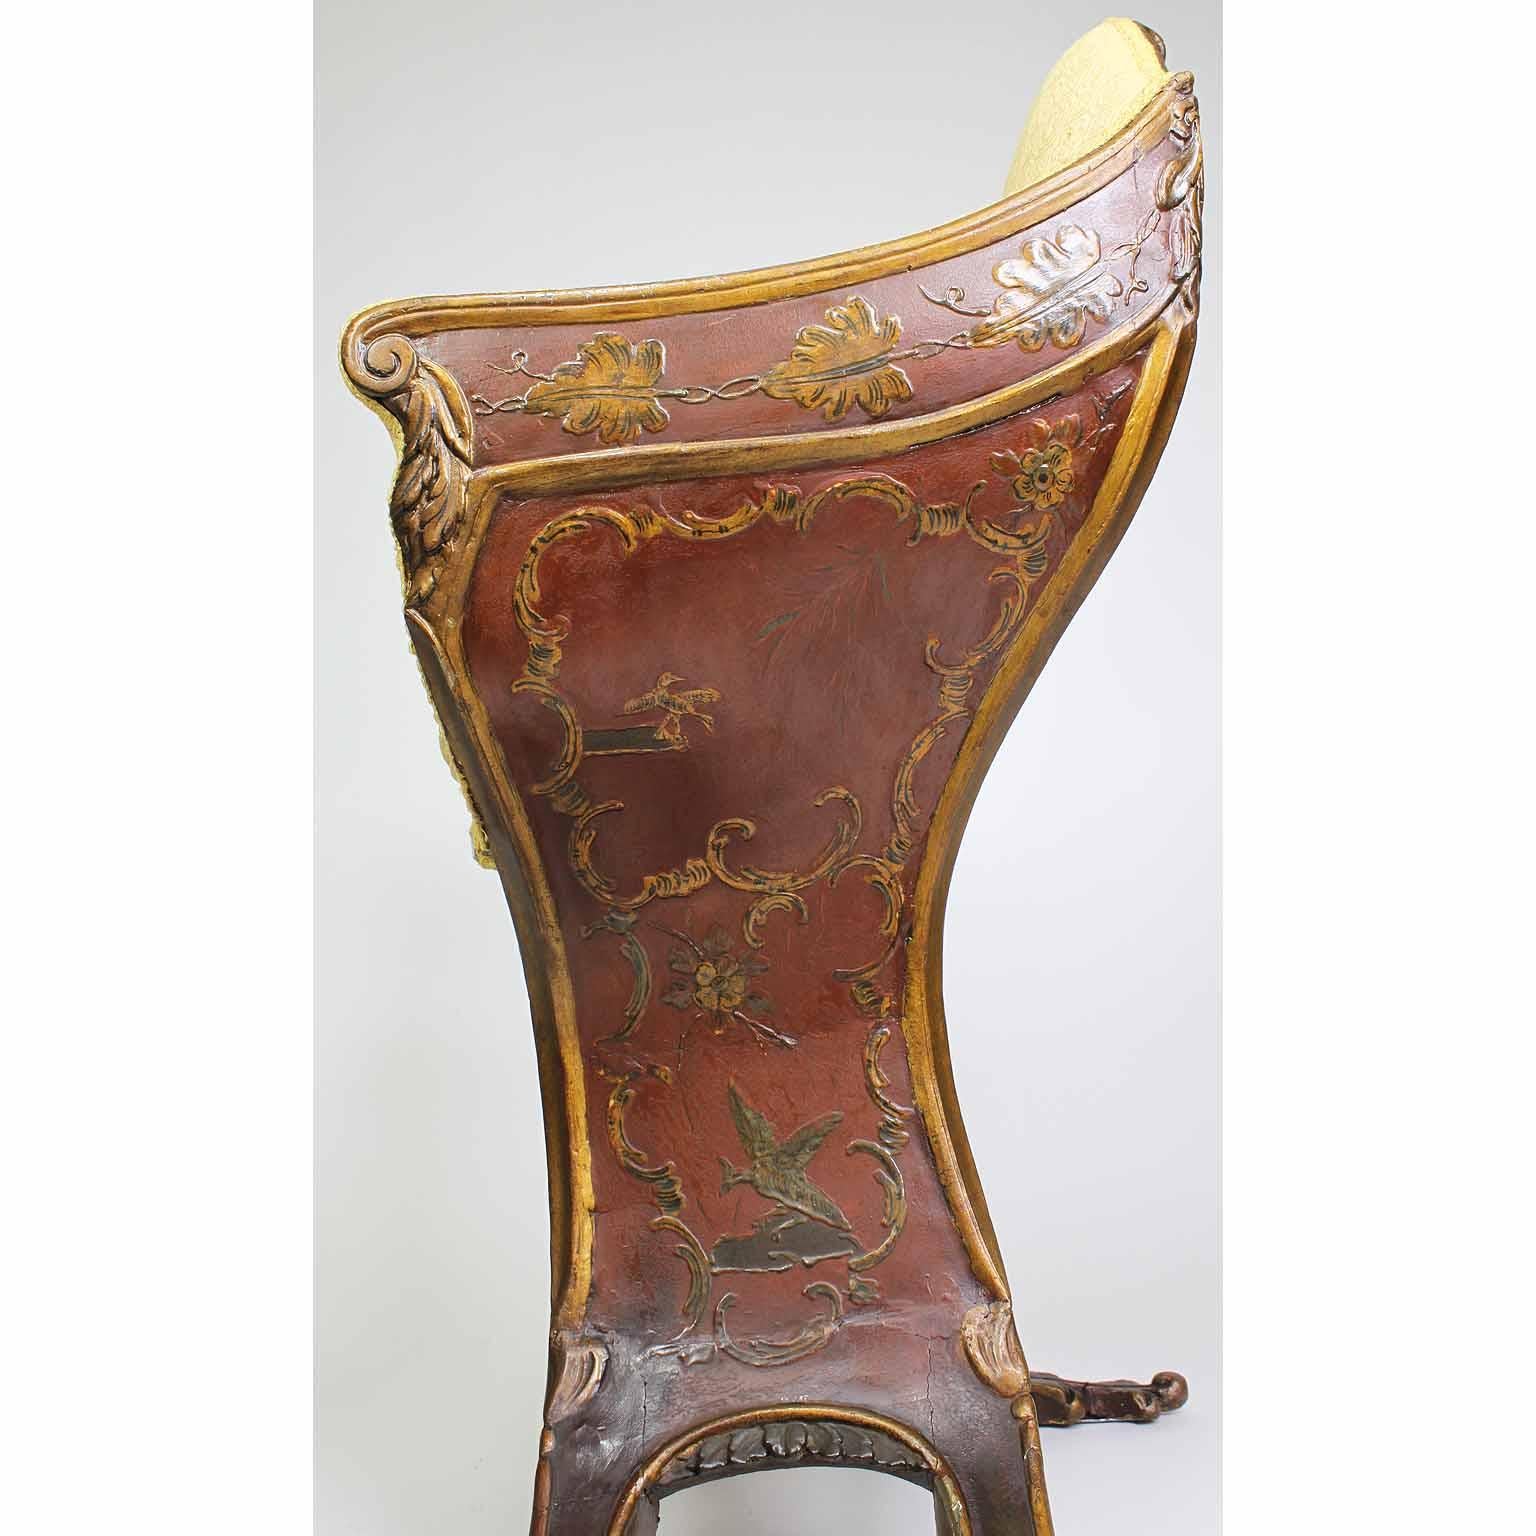 Wood Rare Venetian 18th-19th Century Chinoiserie Red-Lacquer and Gilt Gondola Chair